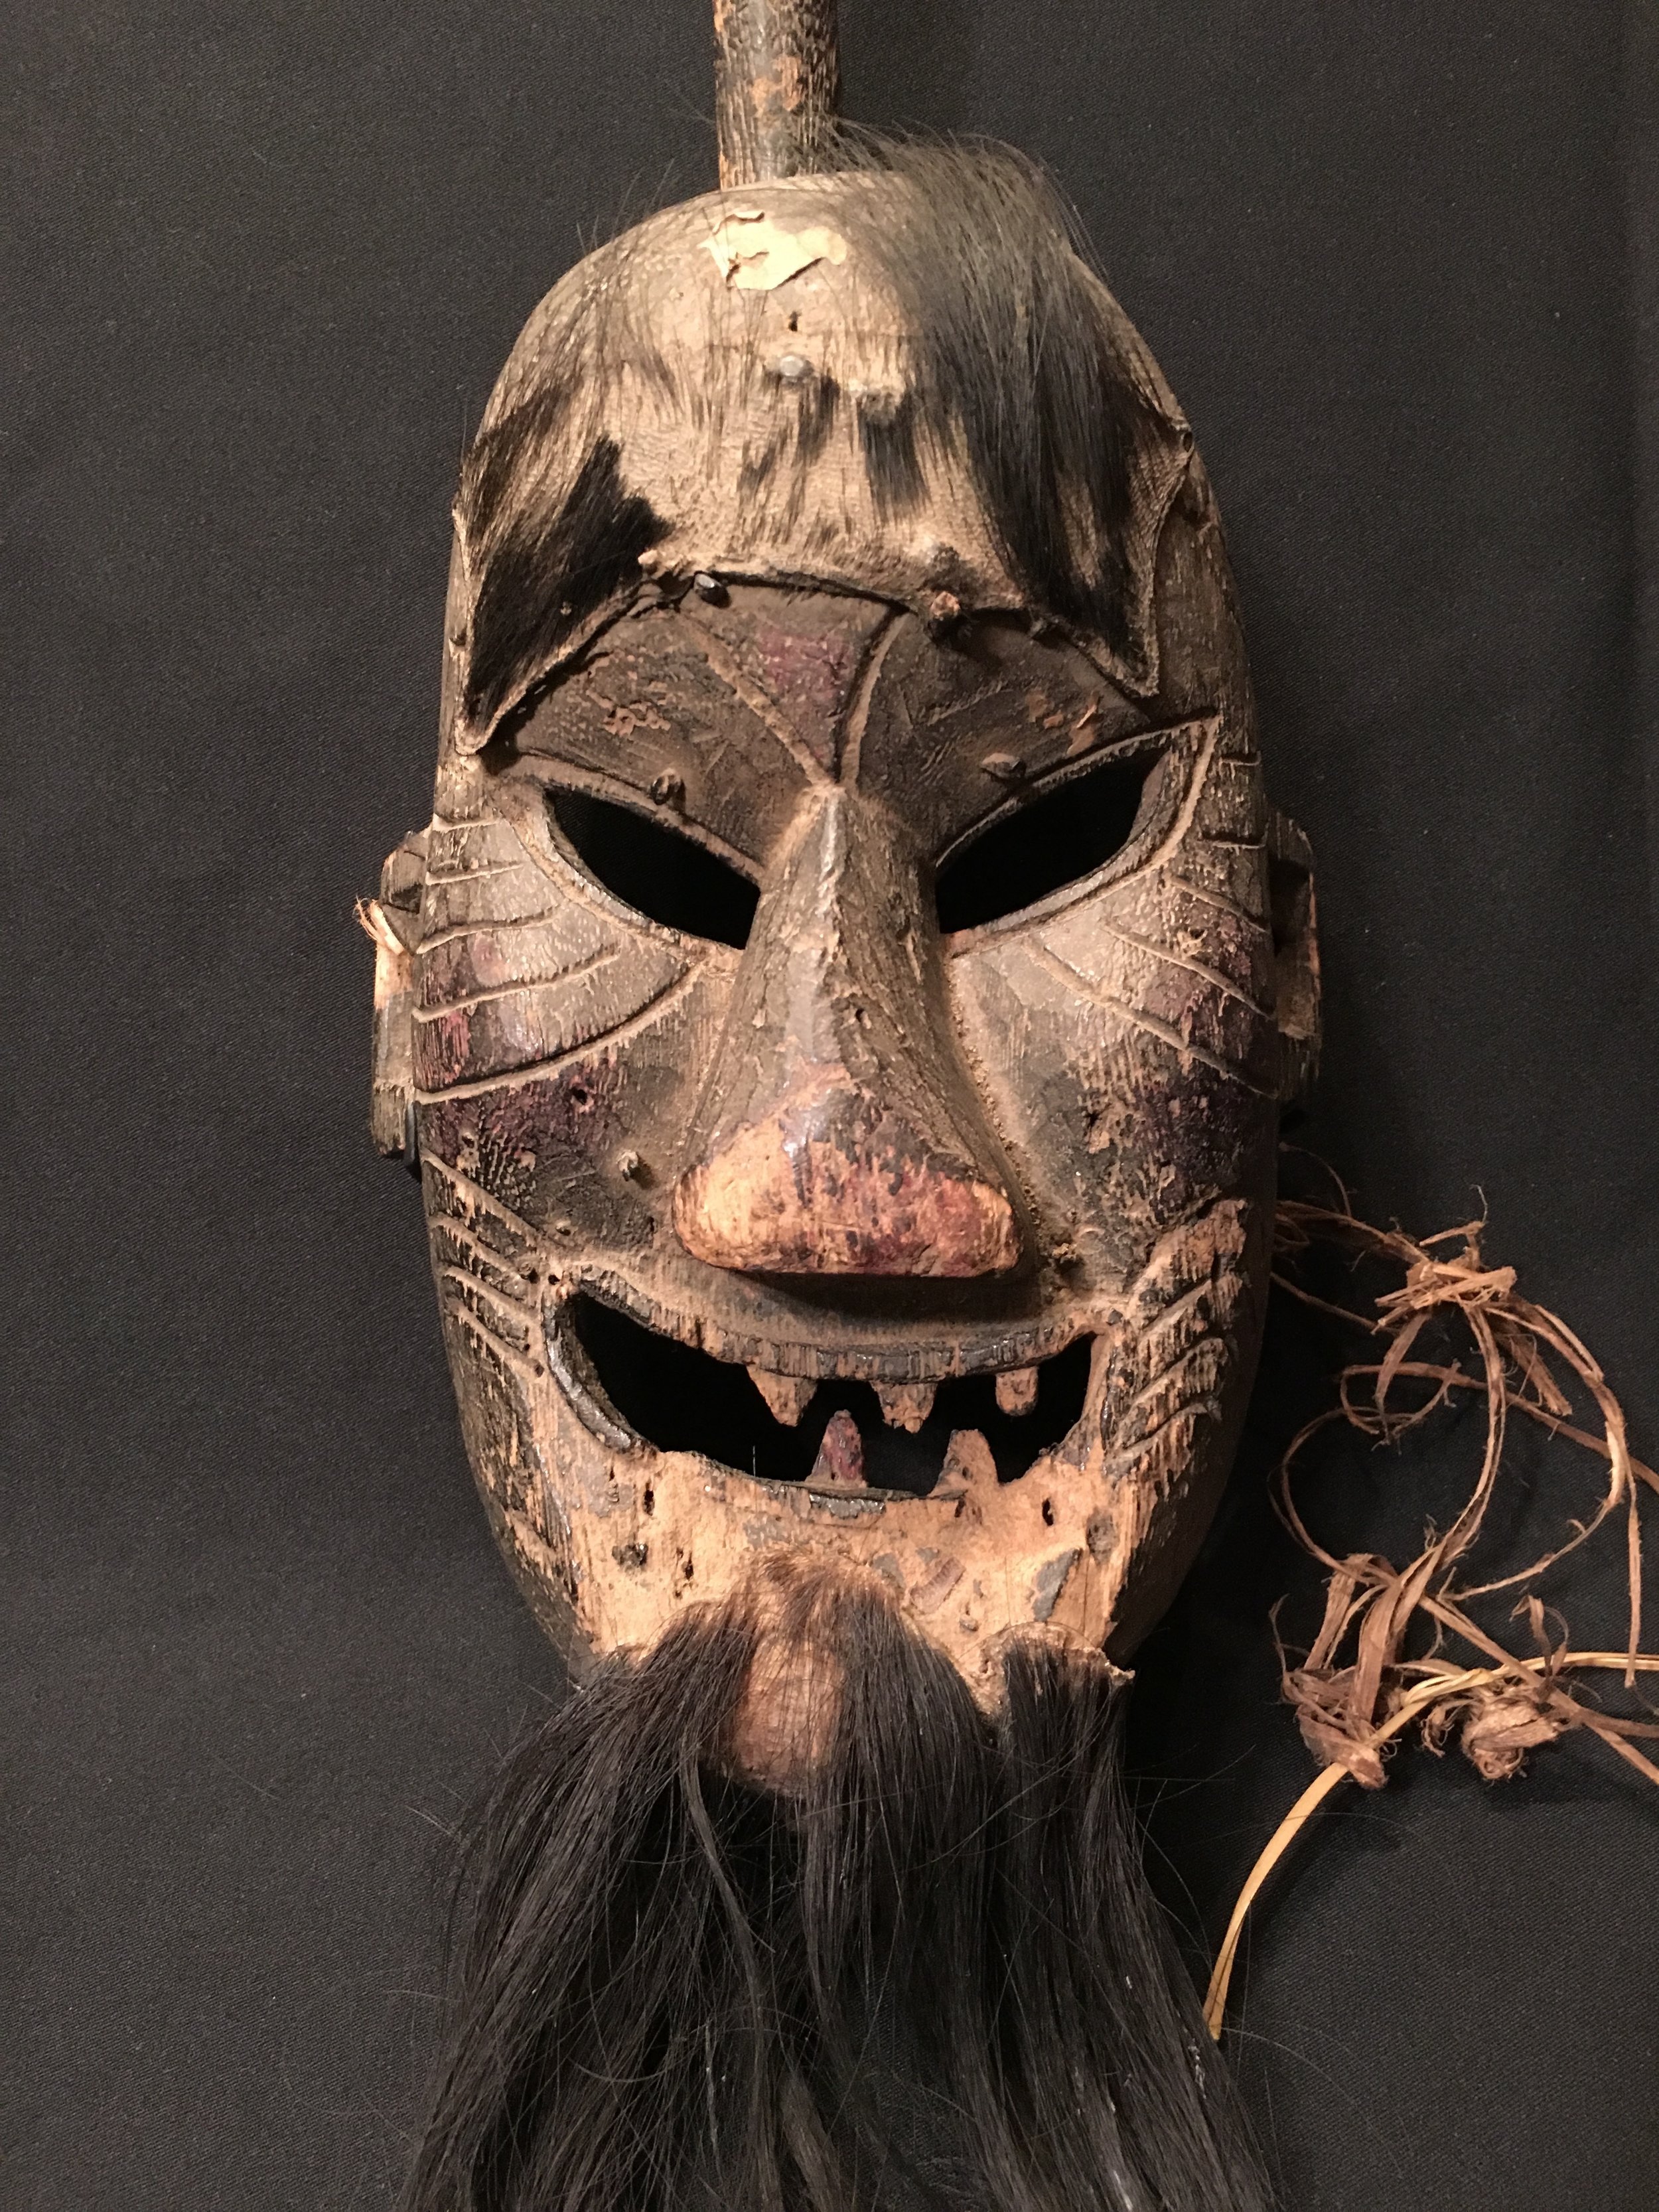 Yao priest or shaman's ceremonial wood mask, China/northern Thailand or Laos, late 19th century.